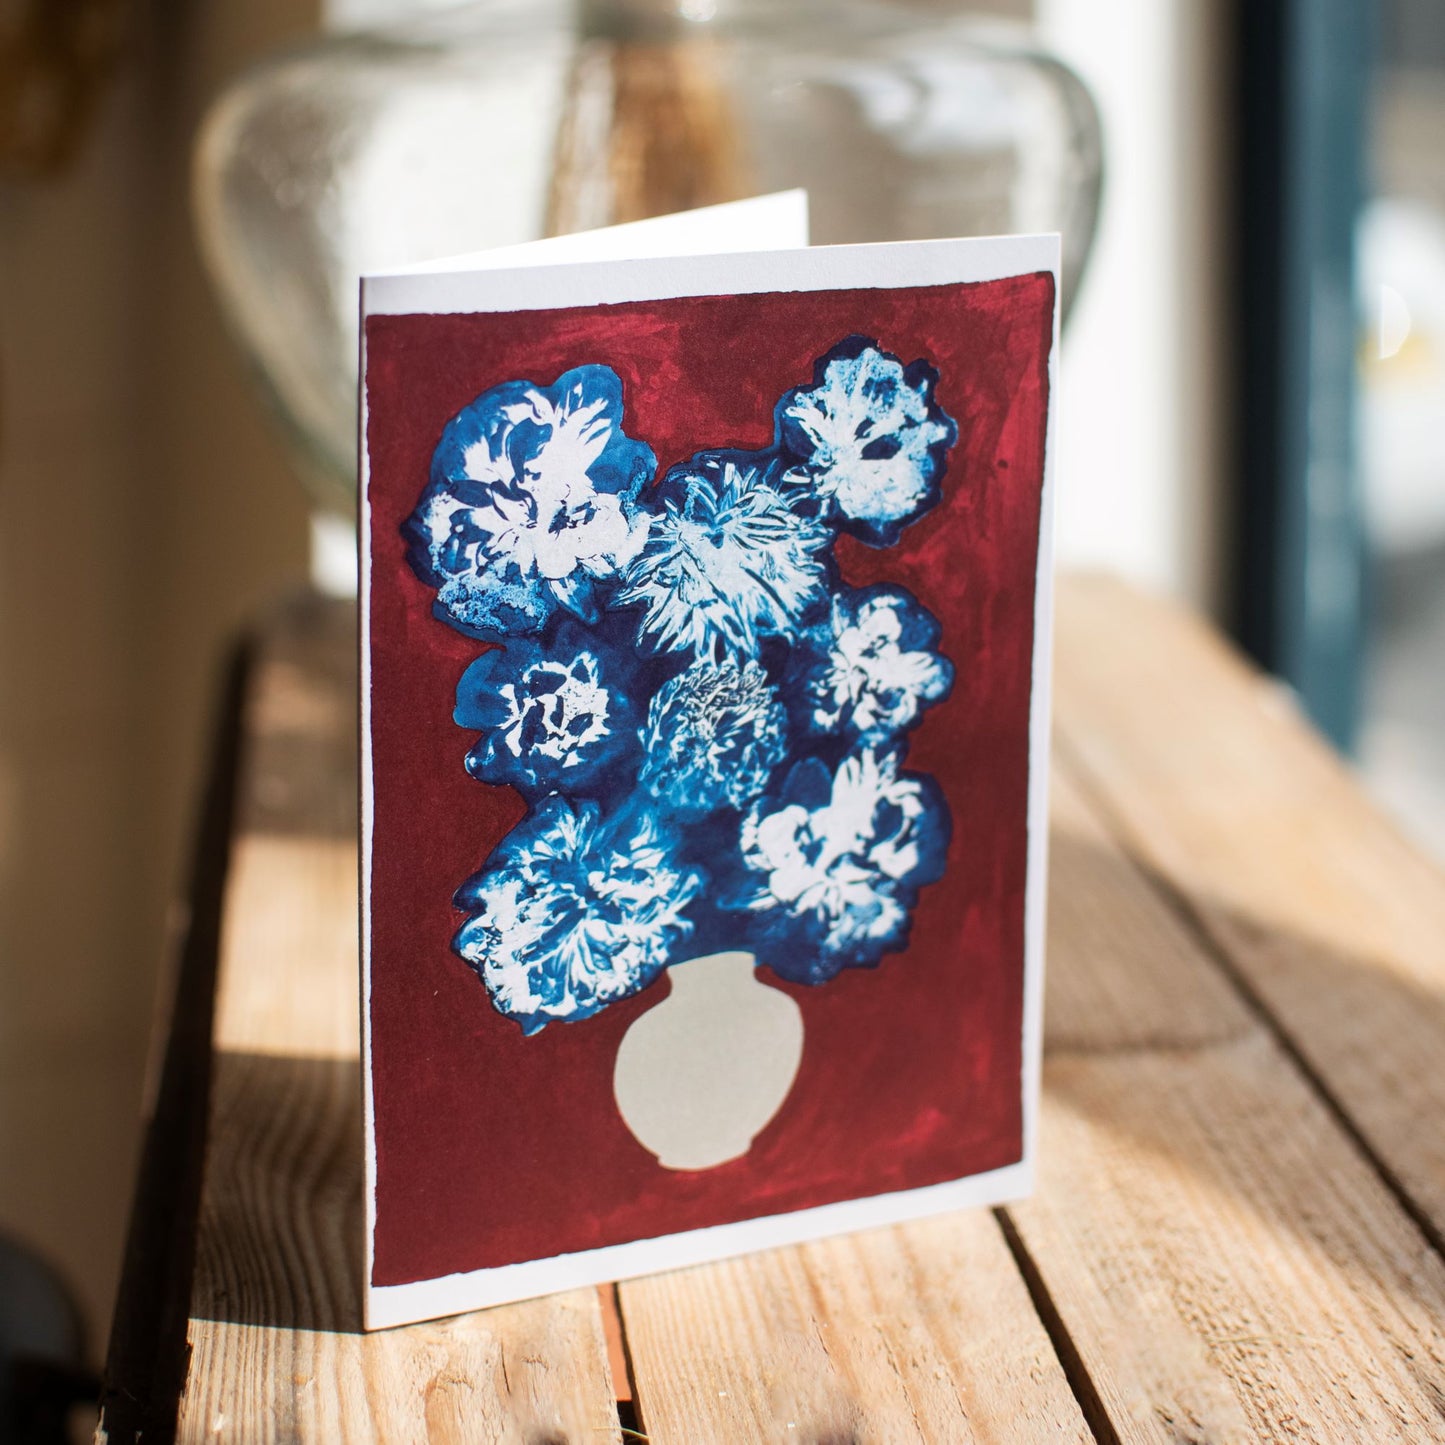 Dahlia Series Vase Five - Greeting Card - The Bristol Artisan Handmade Sustainable Gifts and Homewares.